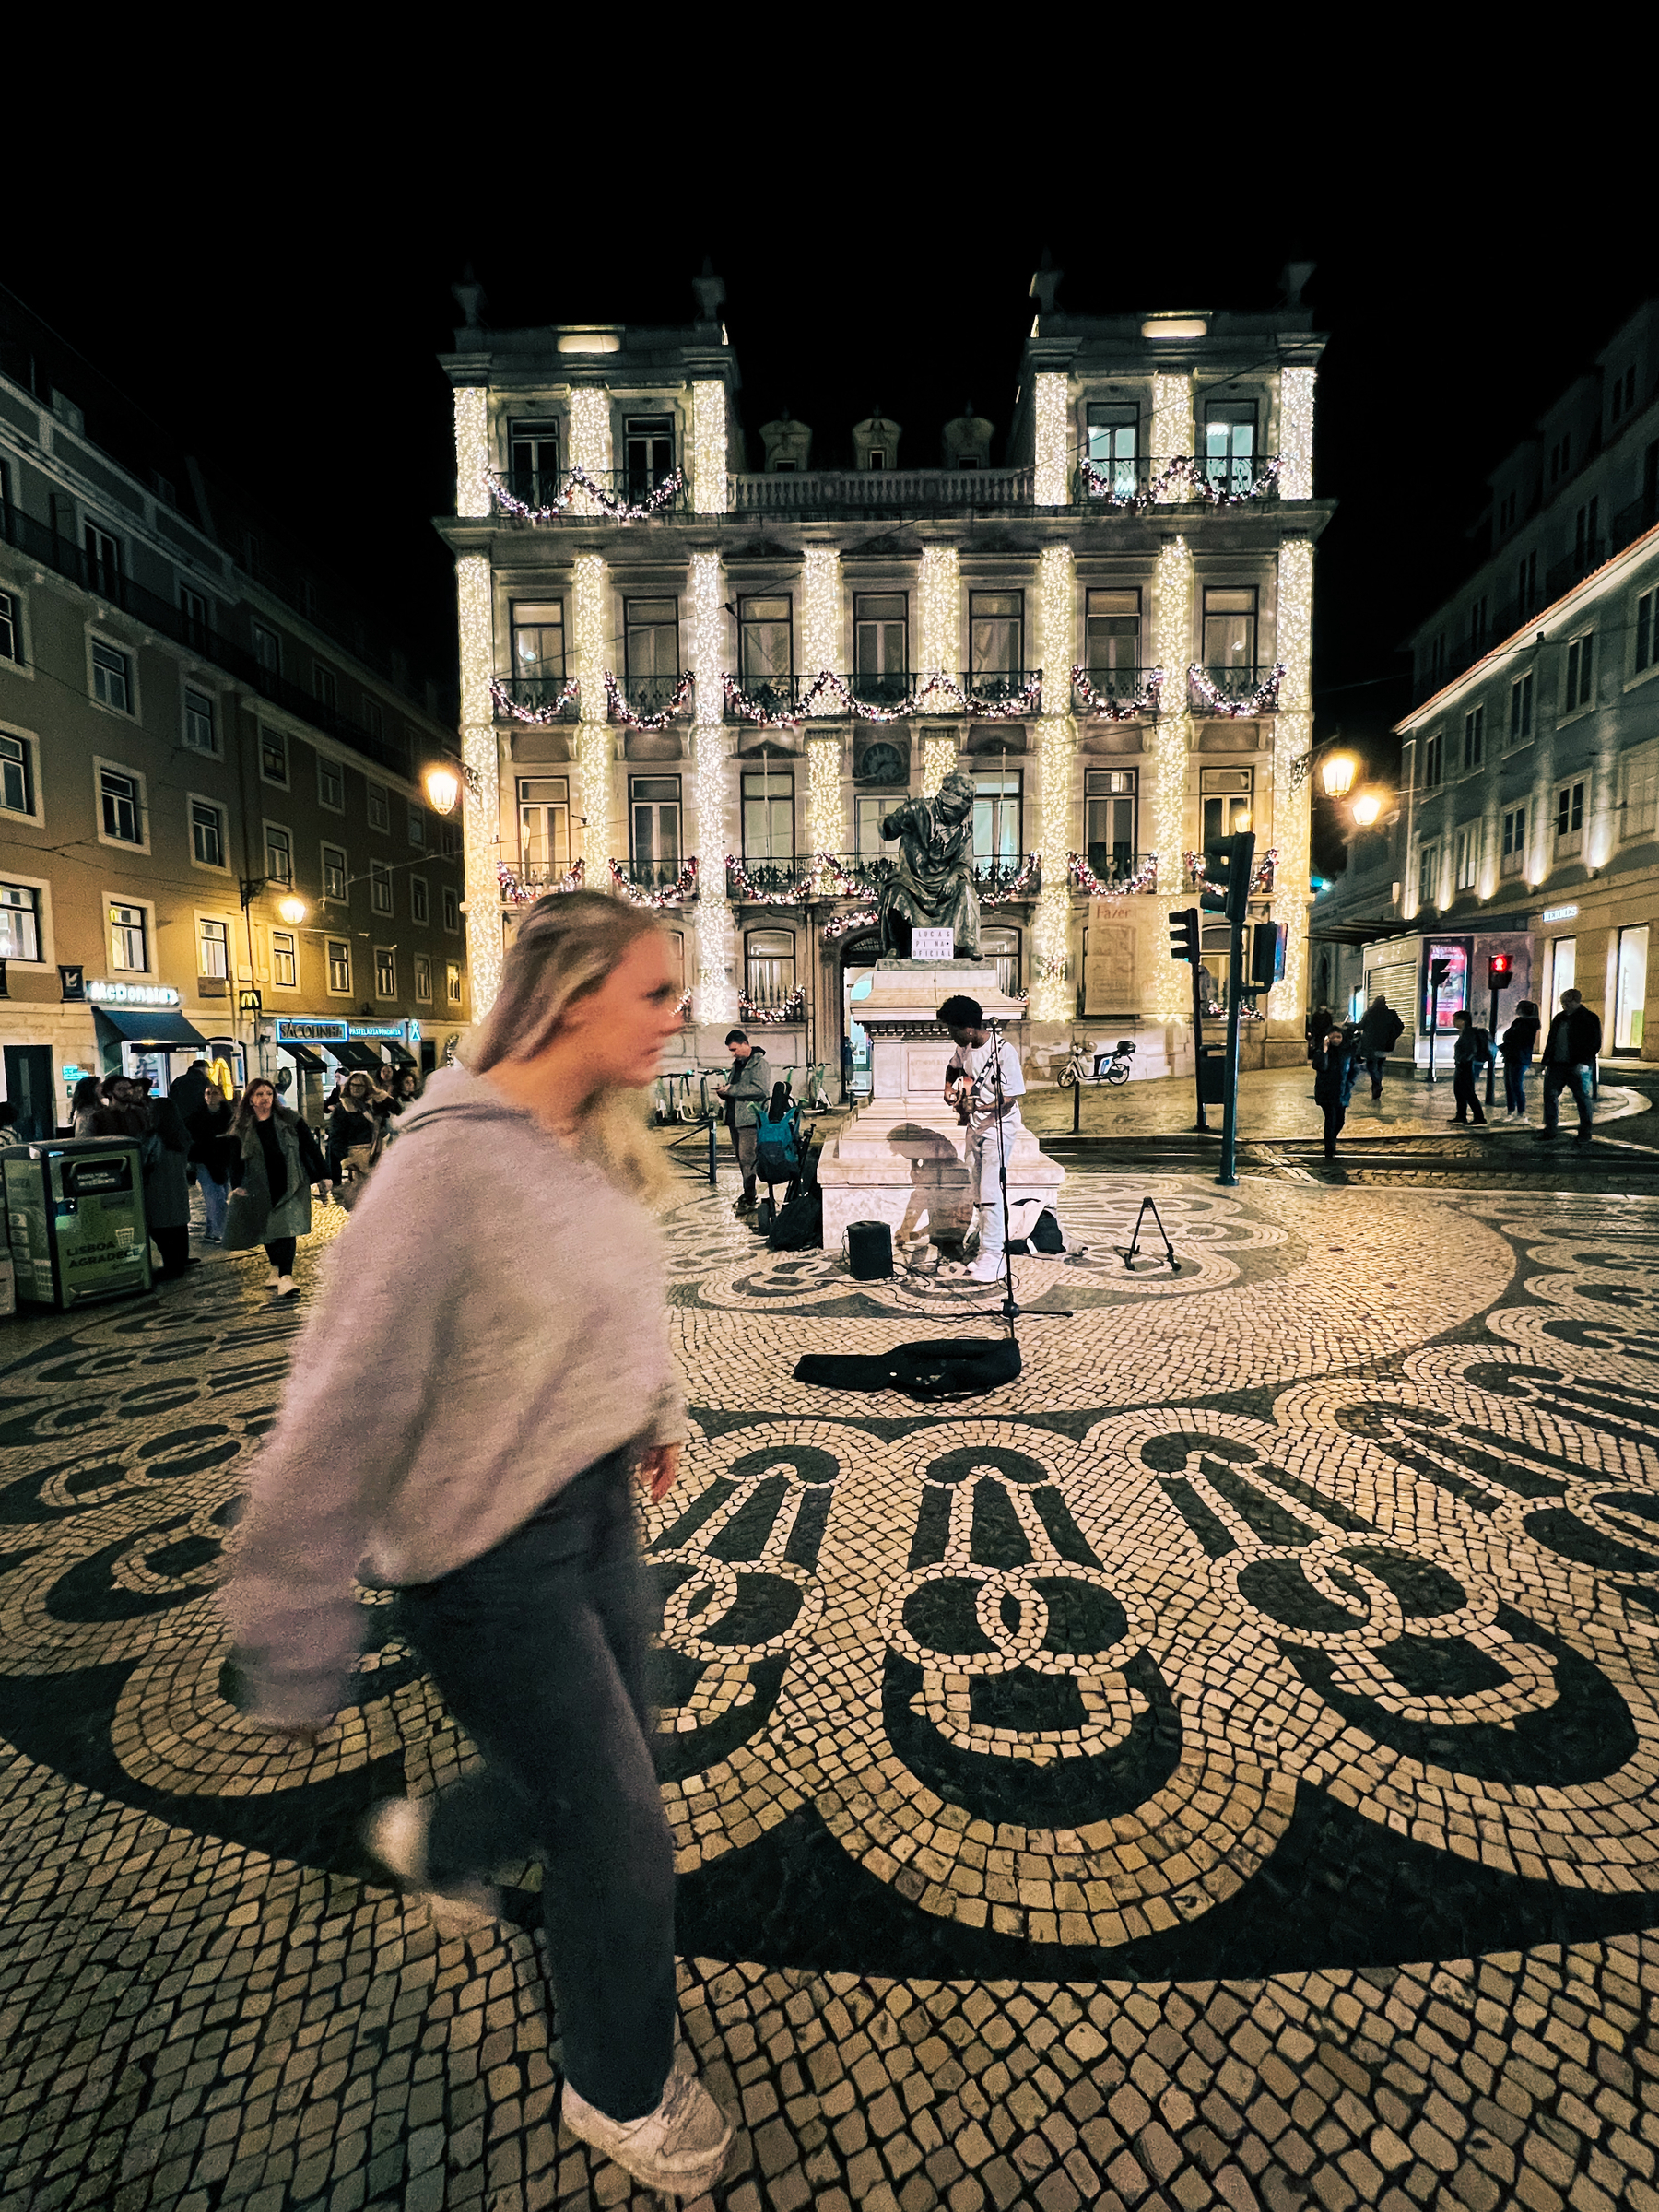 A busy street scene at night with a person walking in the foreground, a street performer in the middle ground, and an ornately decorated building covered in festive lights in the background. The ground features a traditional black and white mosaic pavement.